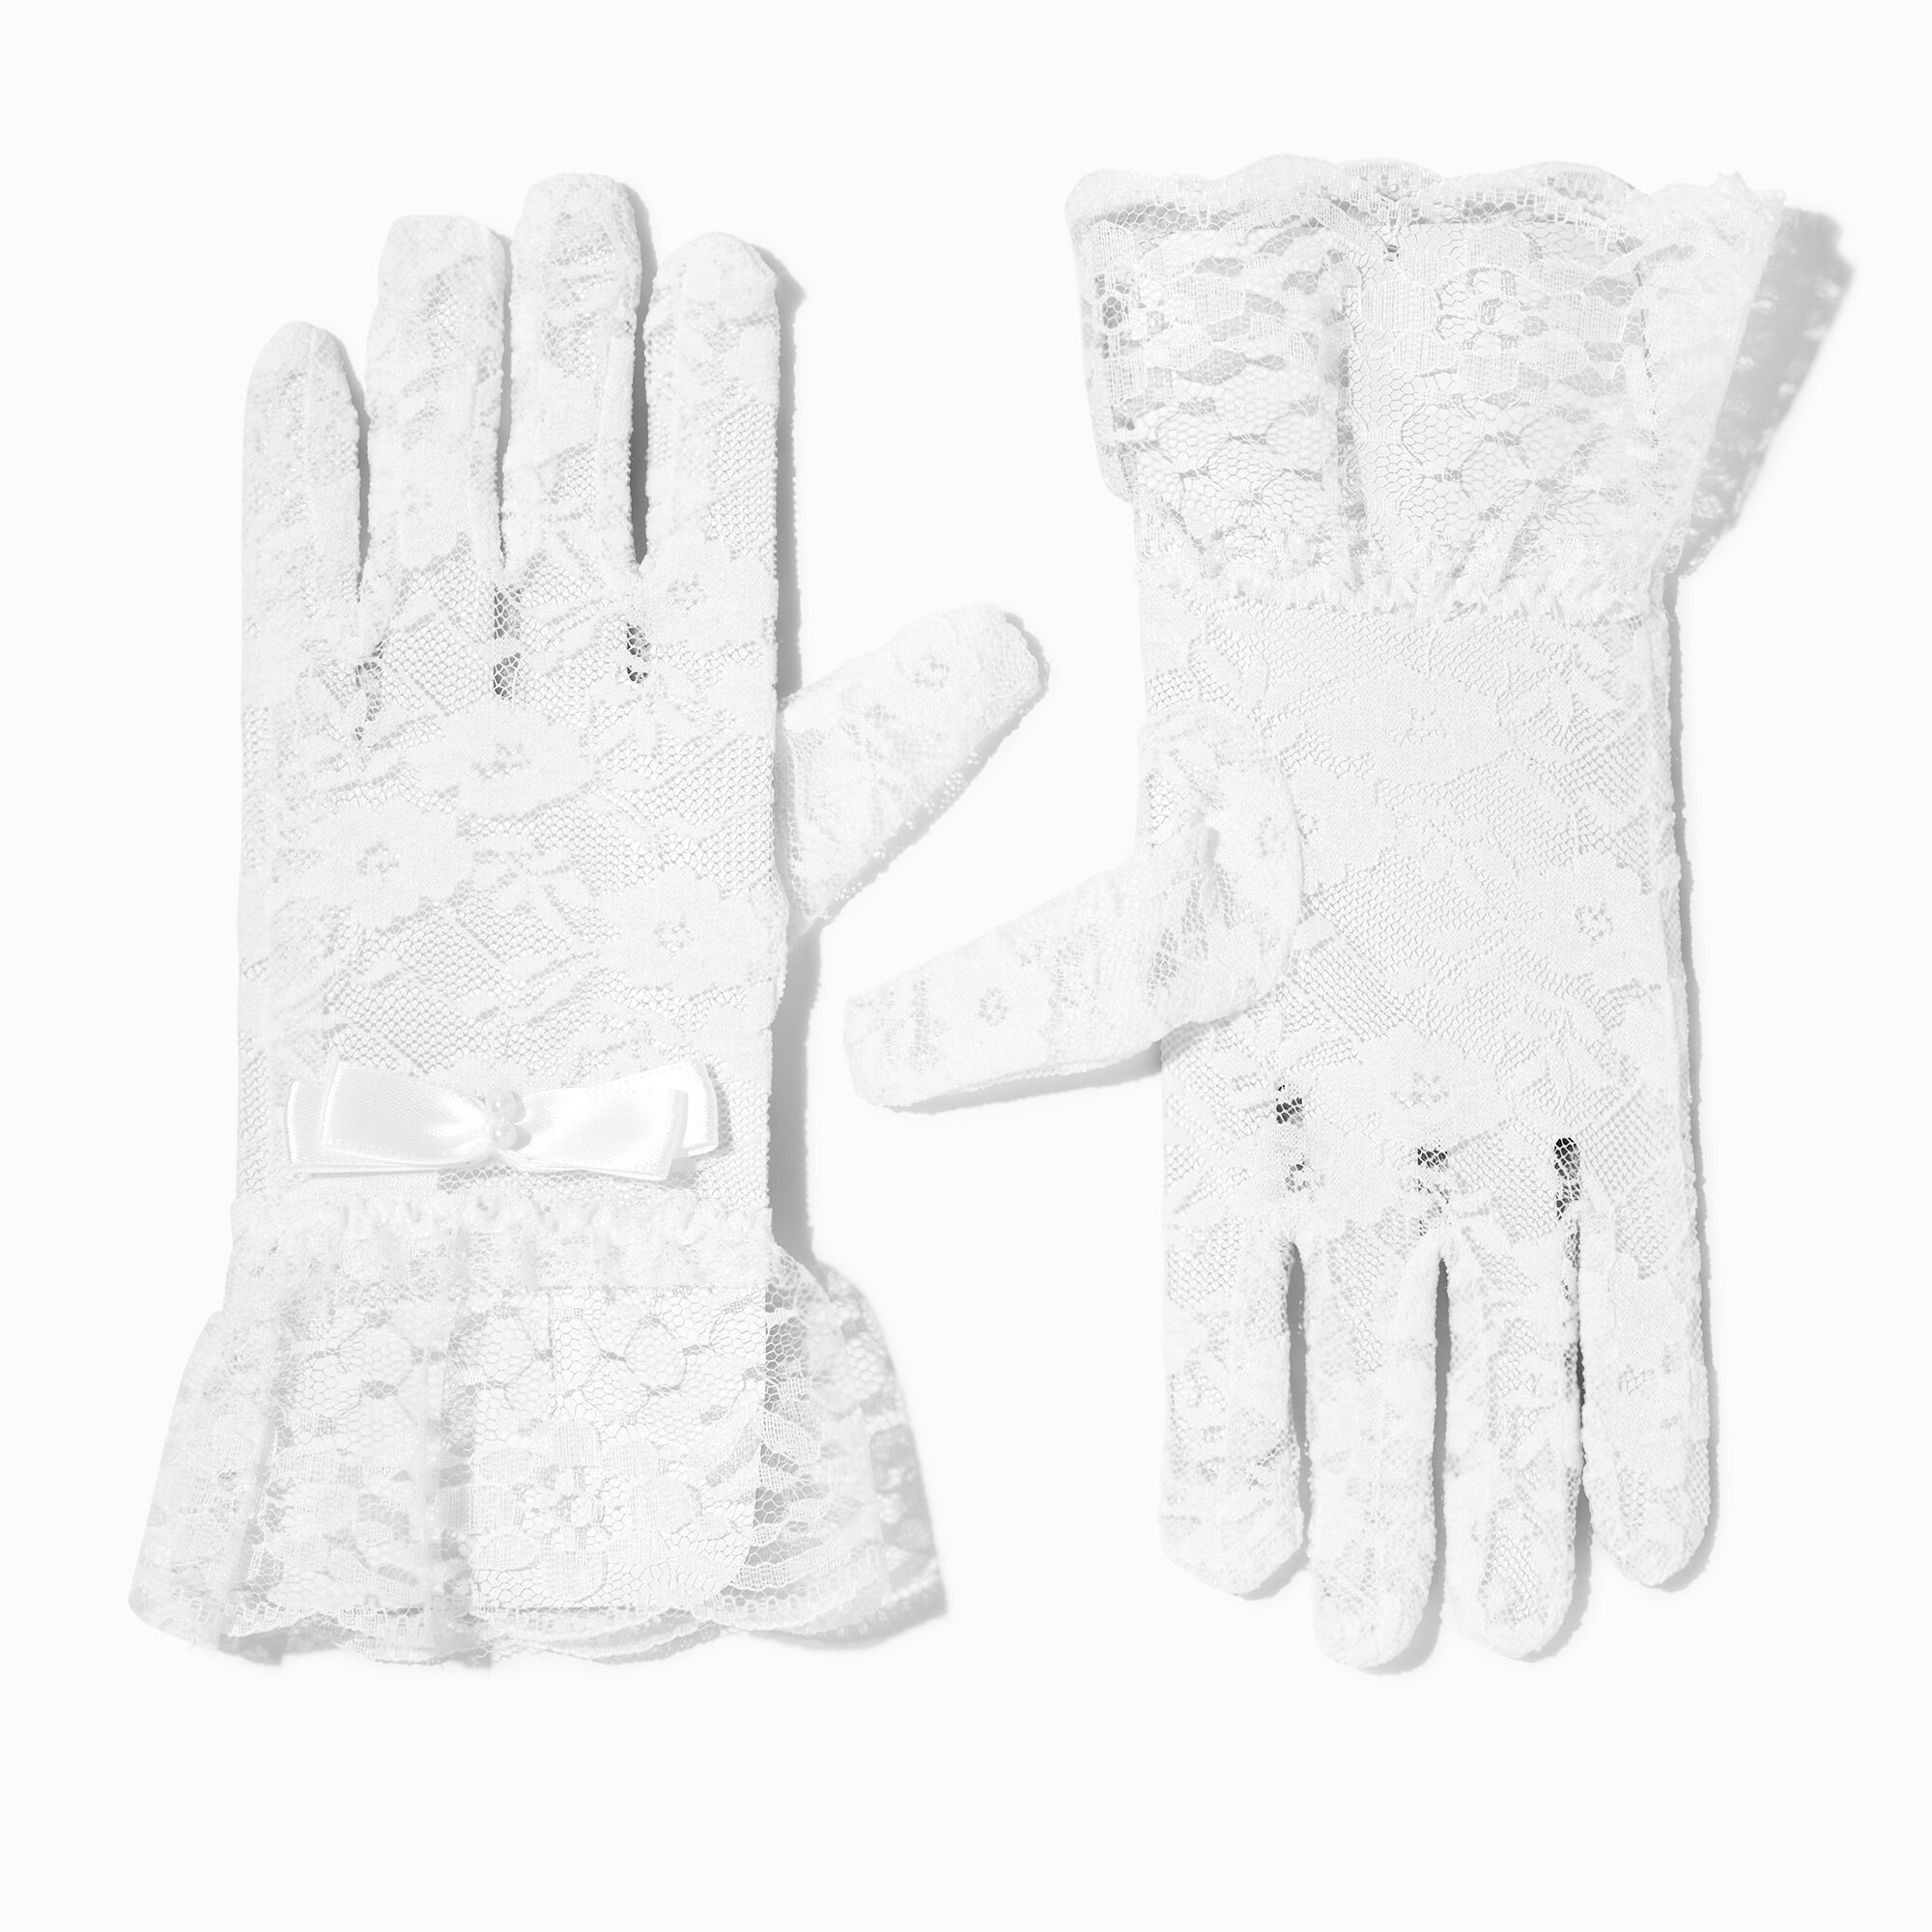 View Claires Club Special Occasion Lace Gloves 1 Pair White information